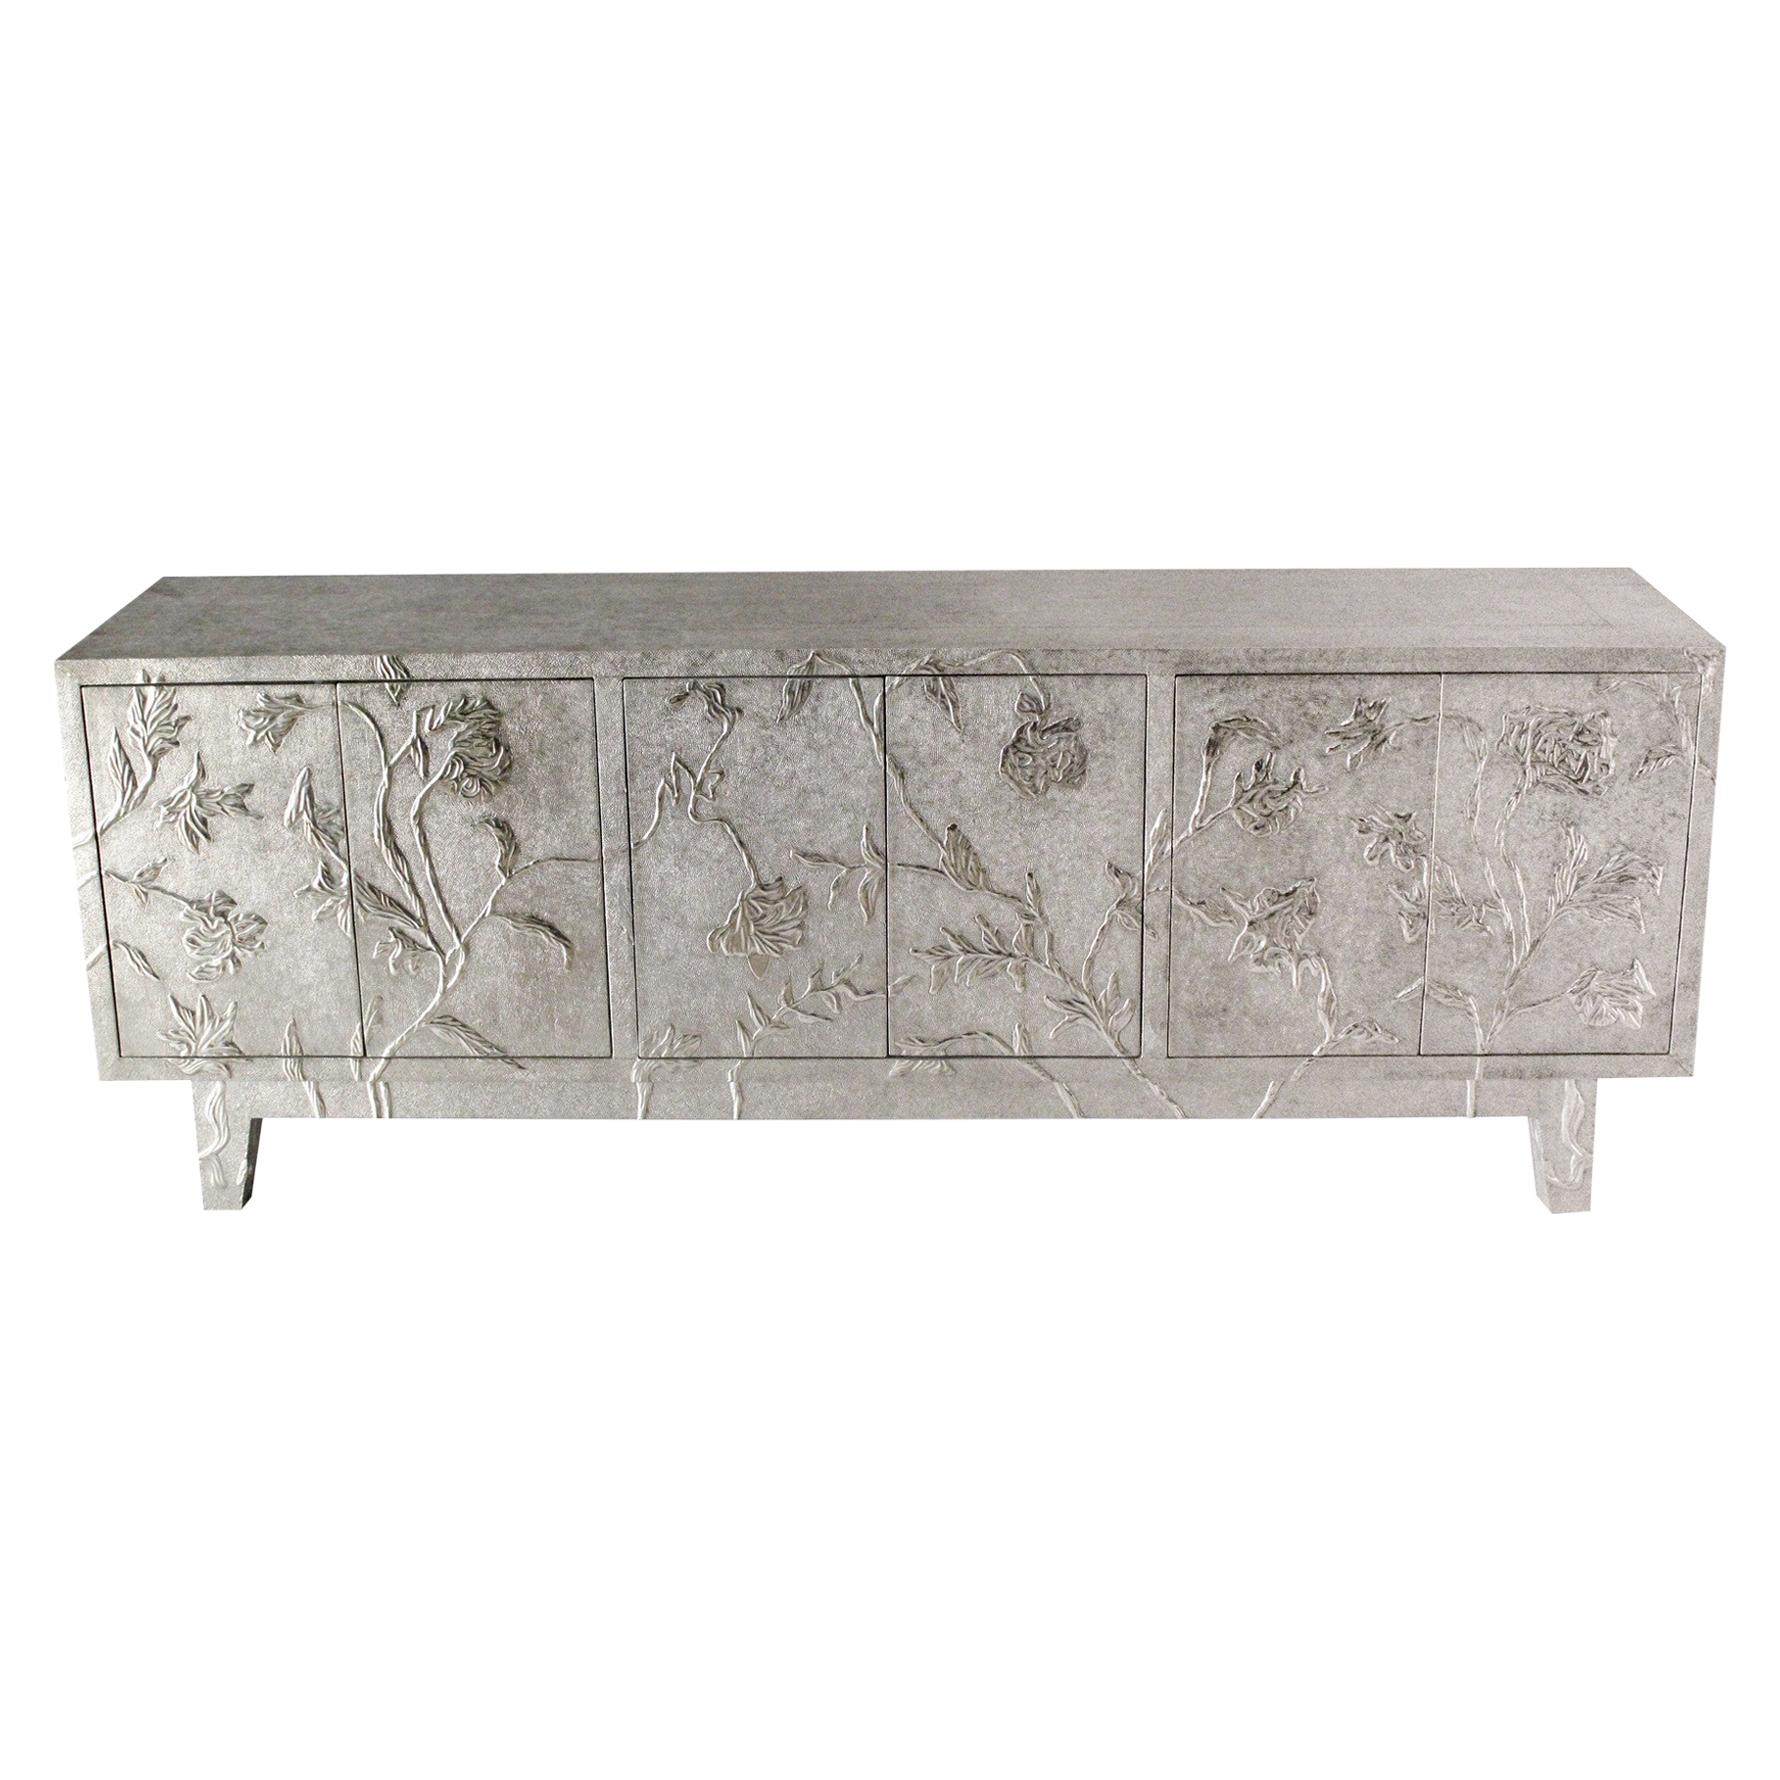 Floral Credenza in White Bronze Clad Over Teakwood Handcrafted In India